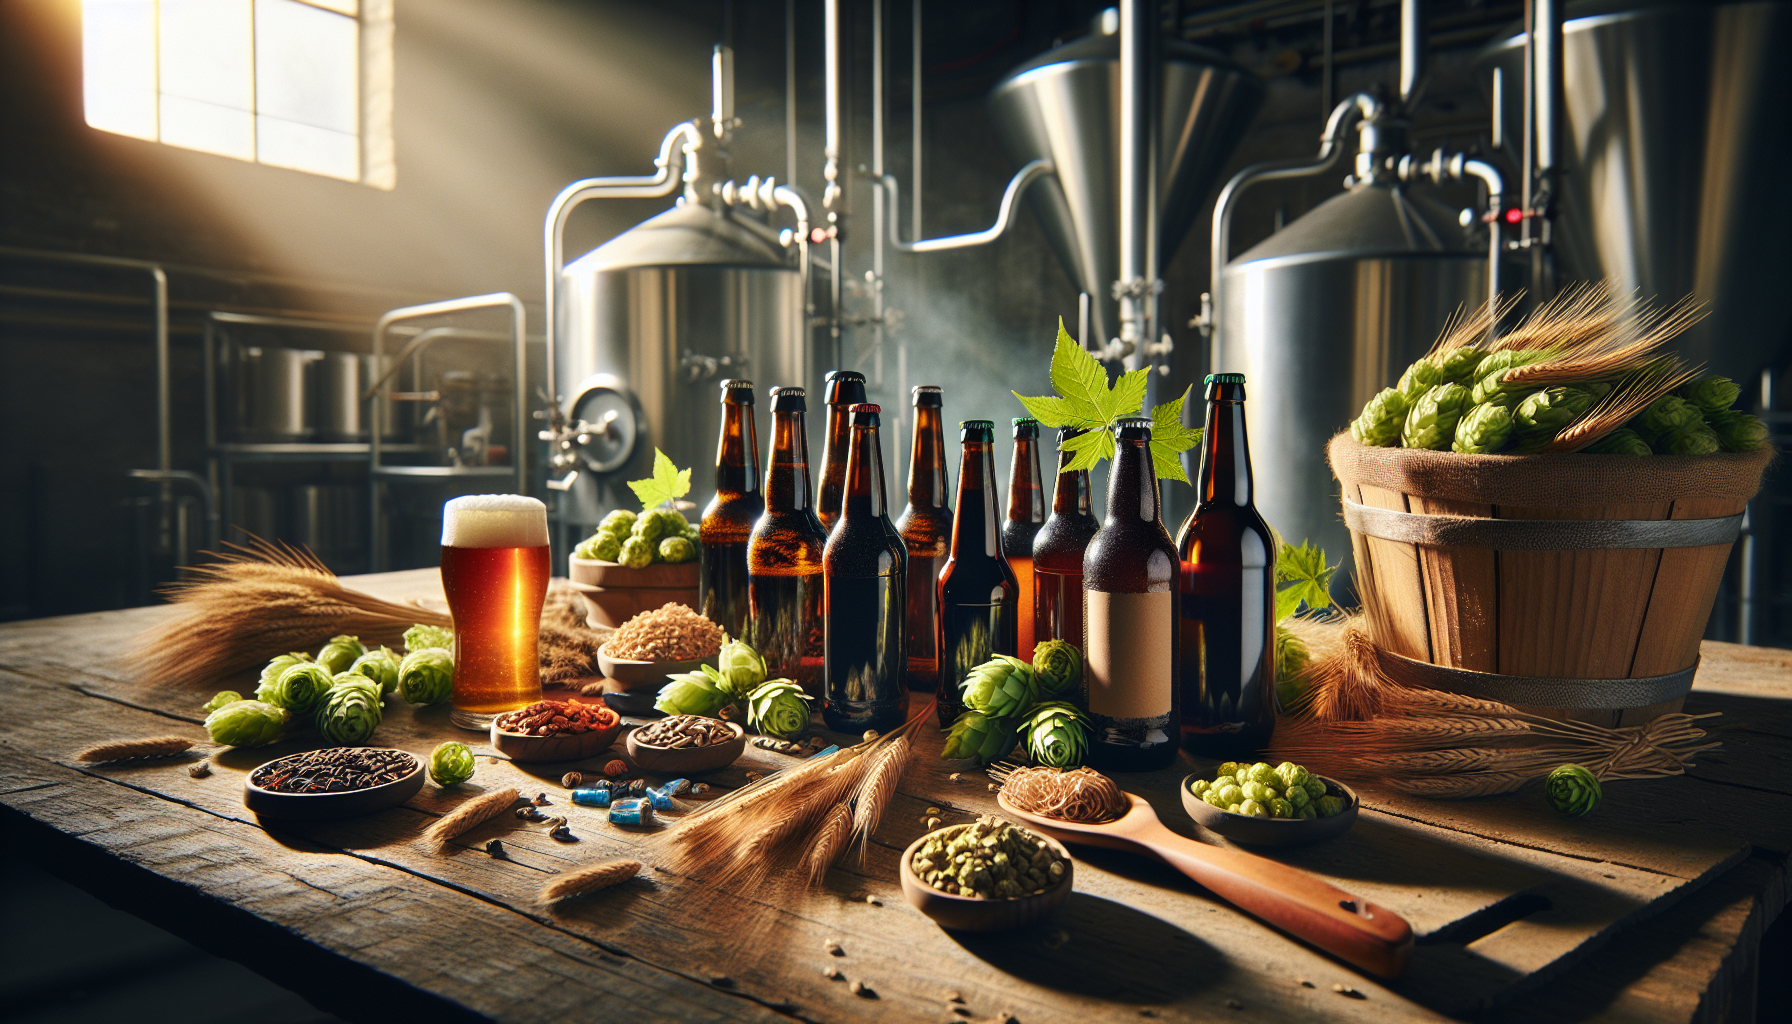 How to Master the Art of Beer Brewing?